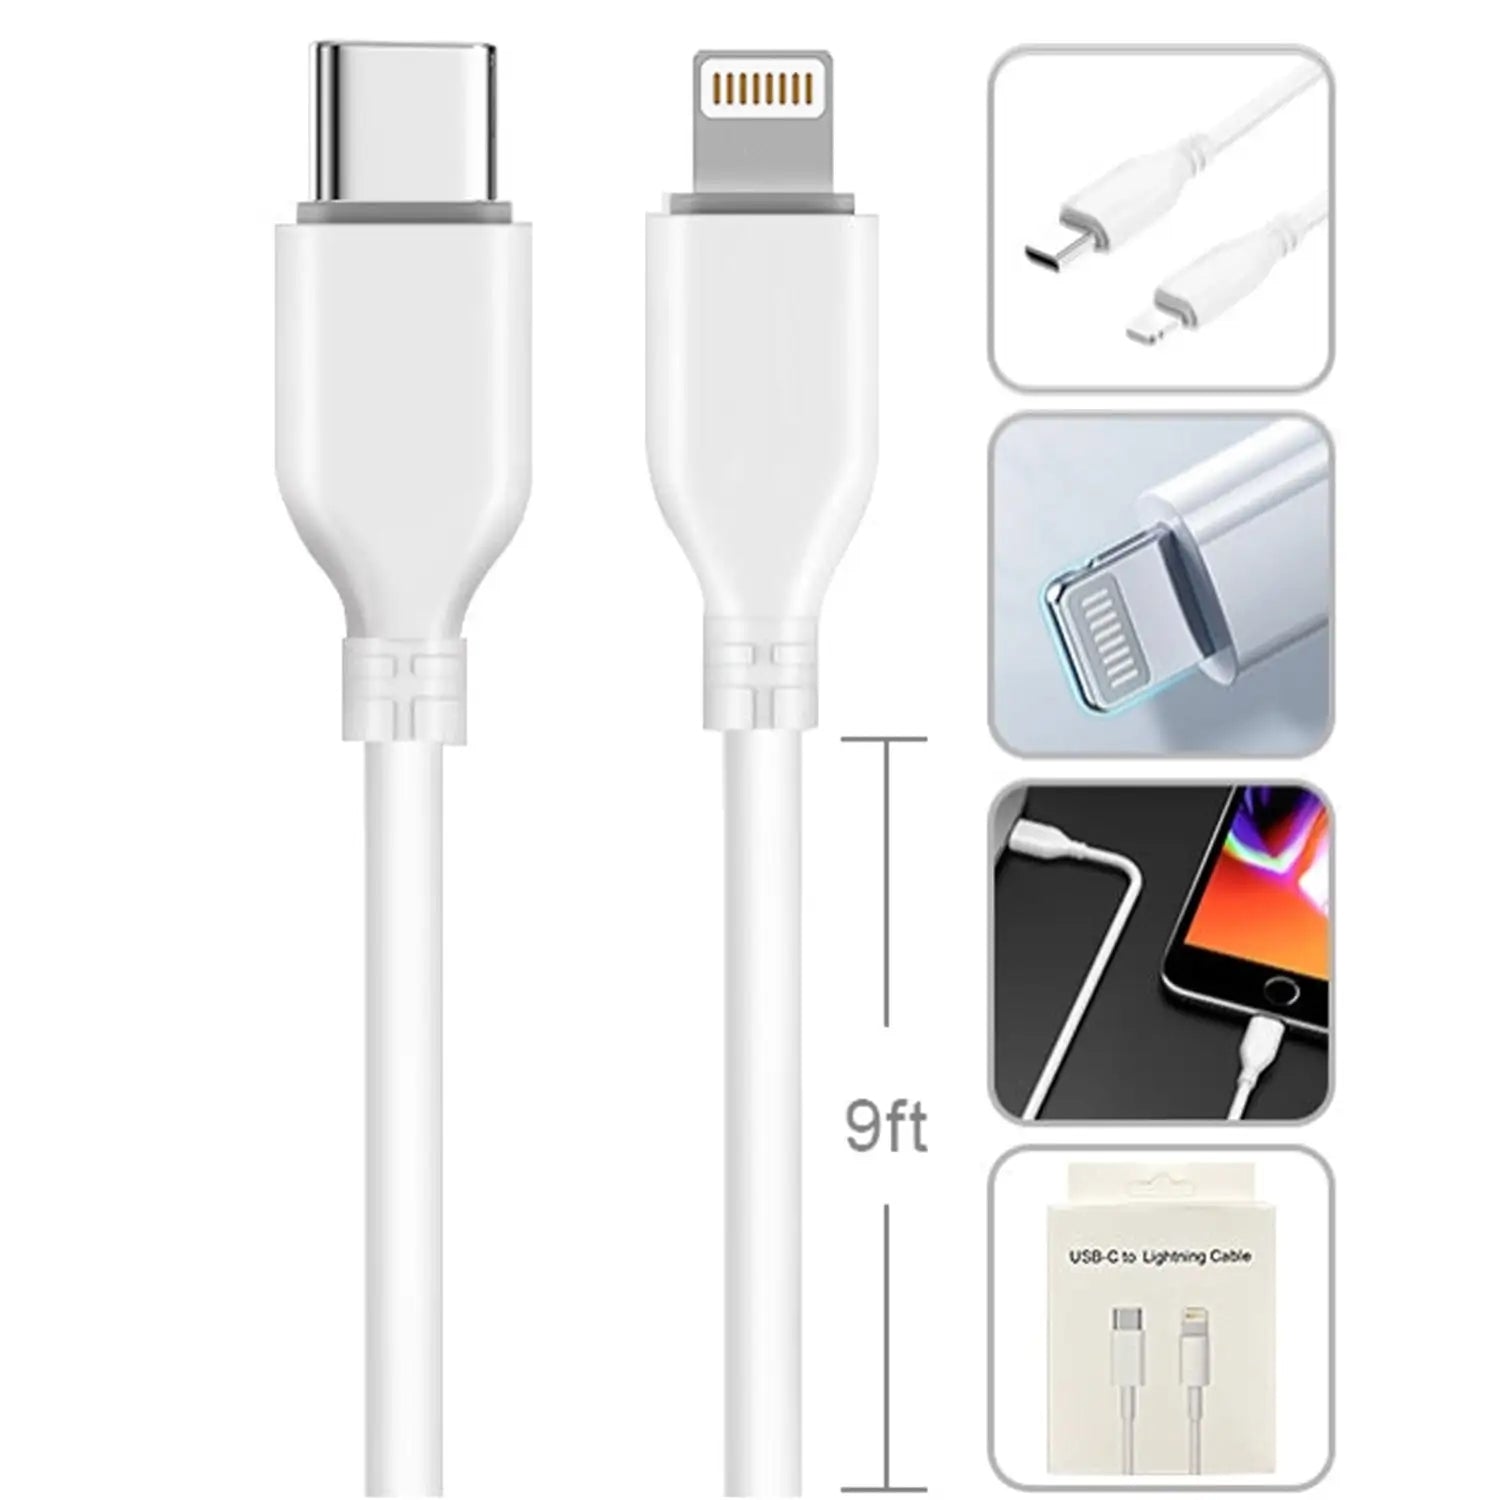 Lightning to Type-C Charging Cable for iPhone 12/12 Pro/ 11 Series (9FT)